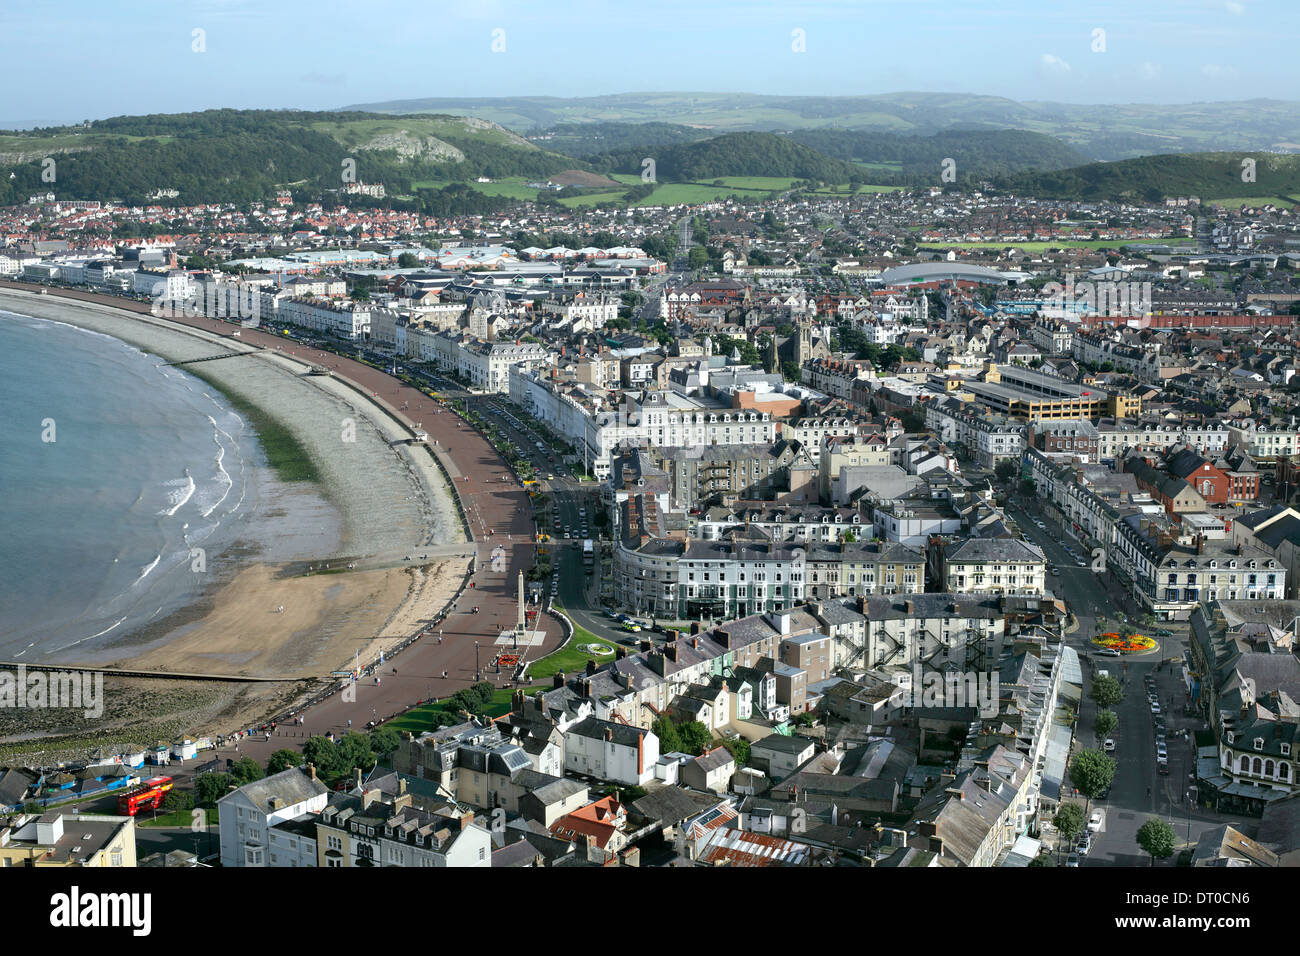 View of Llandudno town centre (foreground) from the Great Orme. Stock Photo